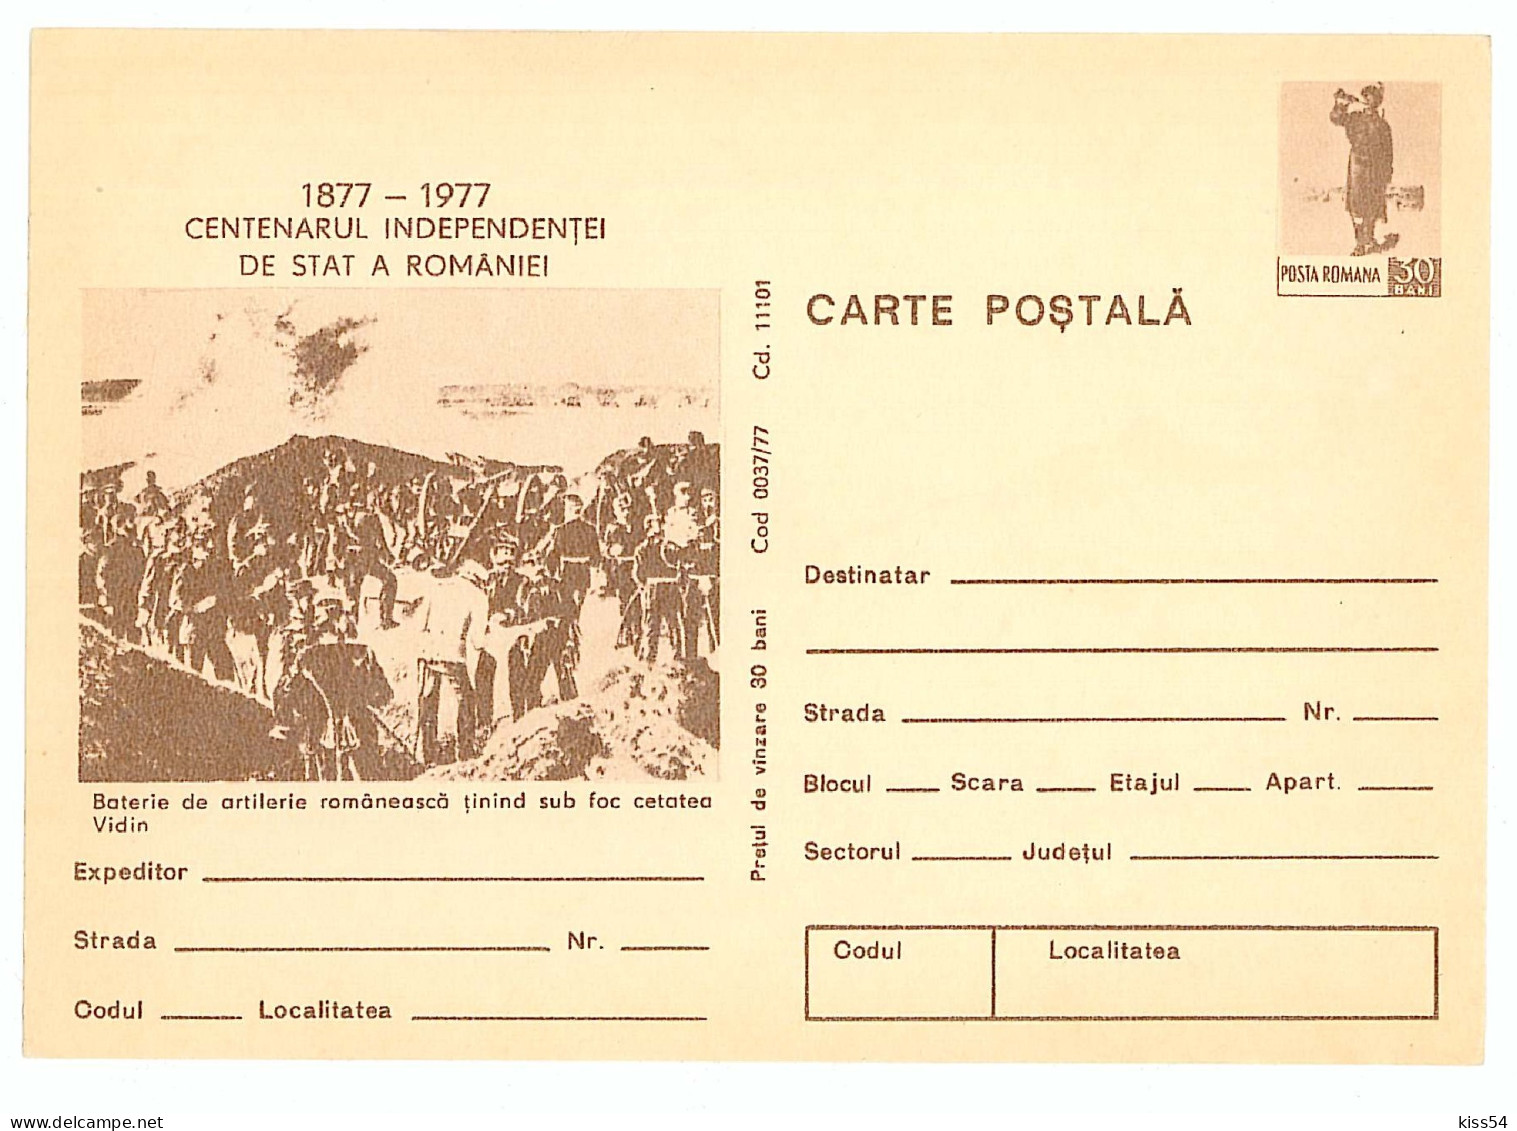 IP 77 A - 37a Centenary Independence Of Romania - Stationery - Unused - 1977 - Postal Stationery